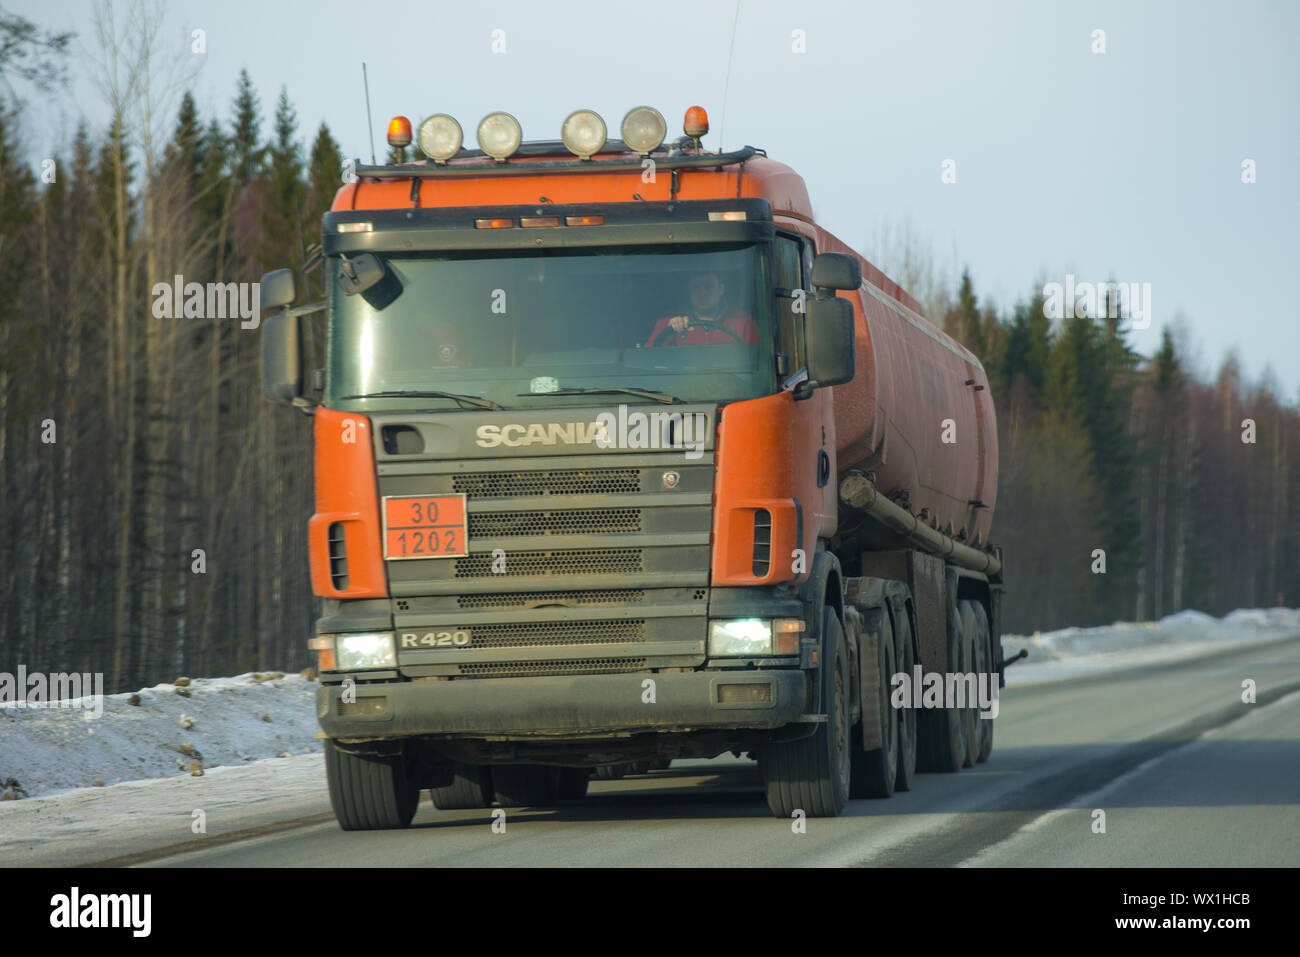 KARELIA, RUSSIA - FEBRUARY 18, 2019: Fuel truck with Scania P420 truck in motion on a winter road close-up Stock Photo